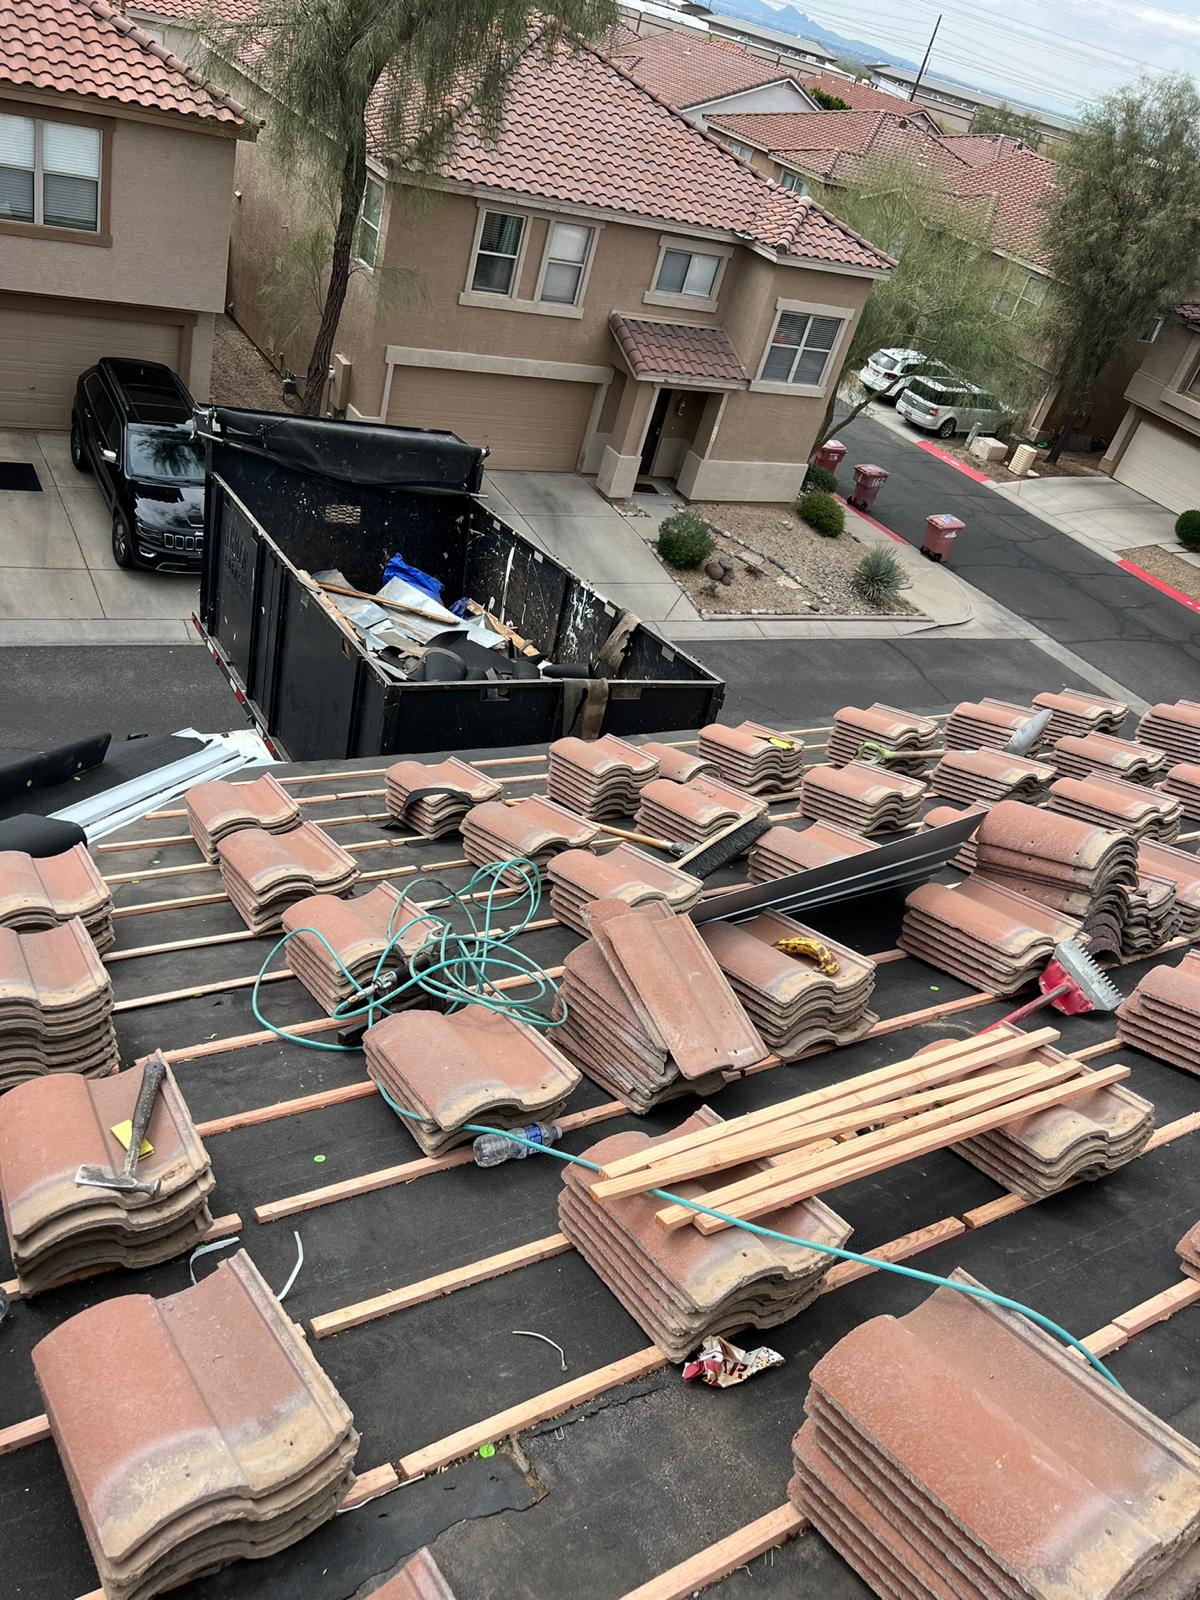 Roofing materials used by Behmer for tile roof leak repair in Estancia.